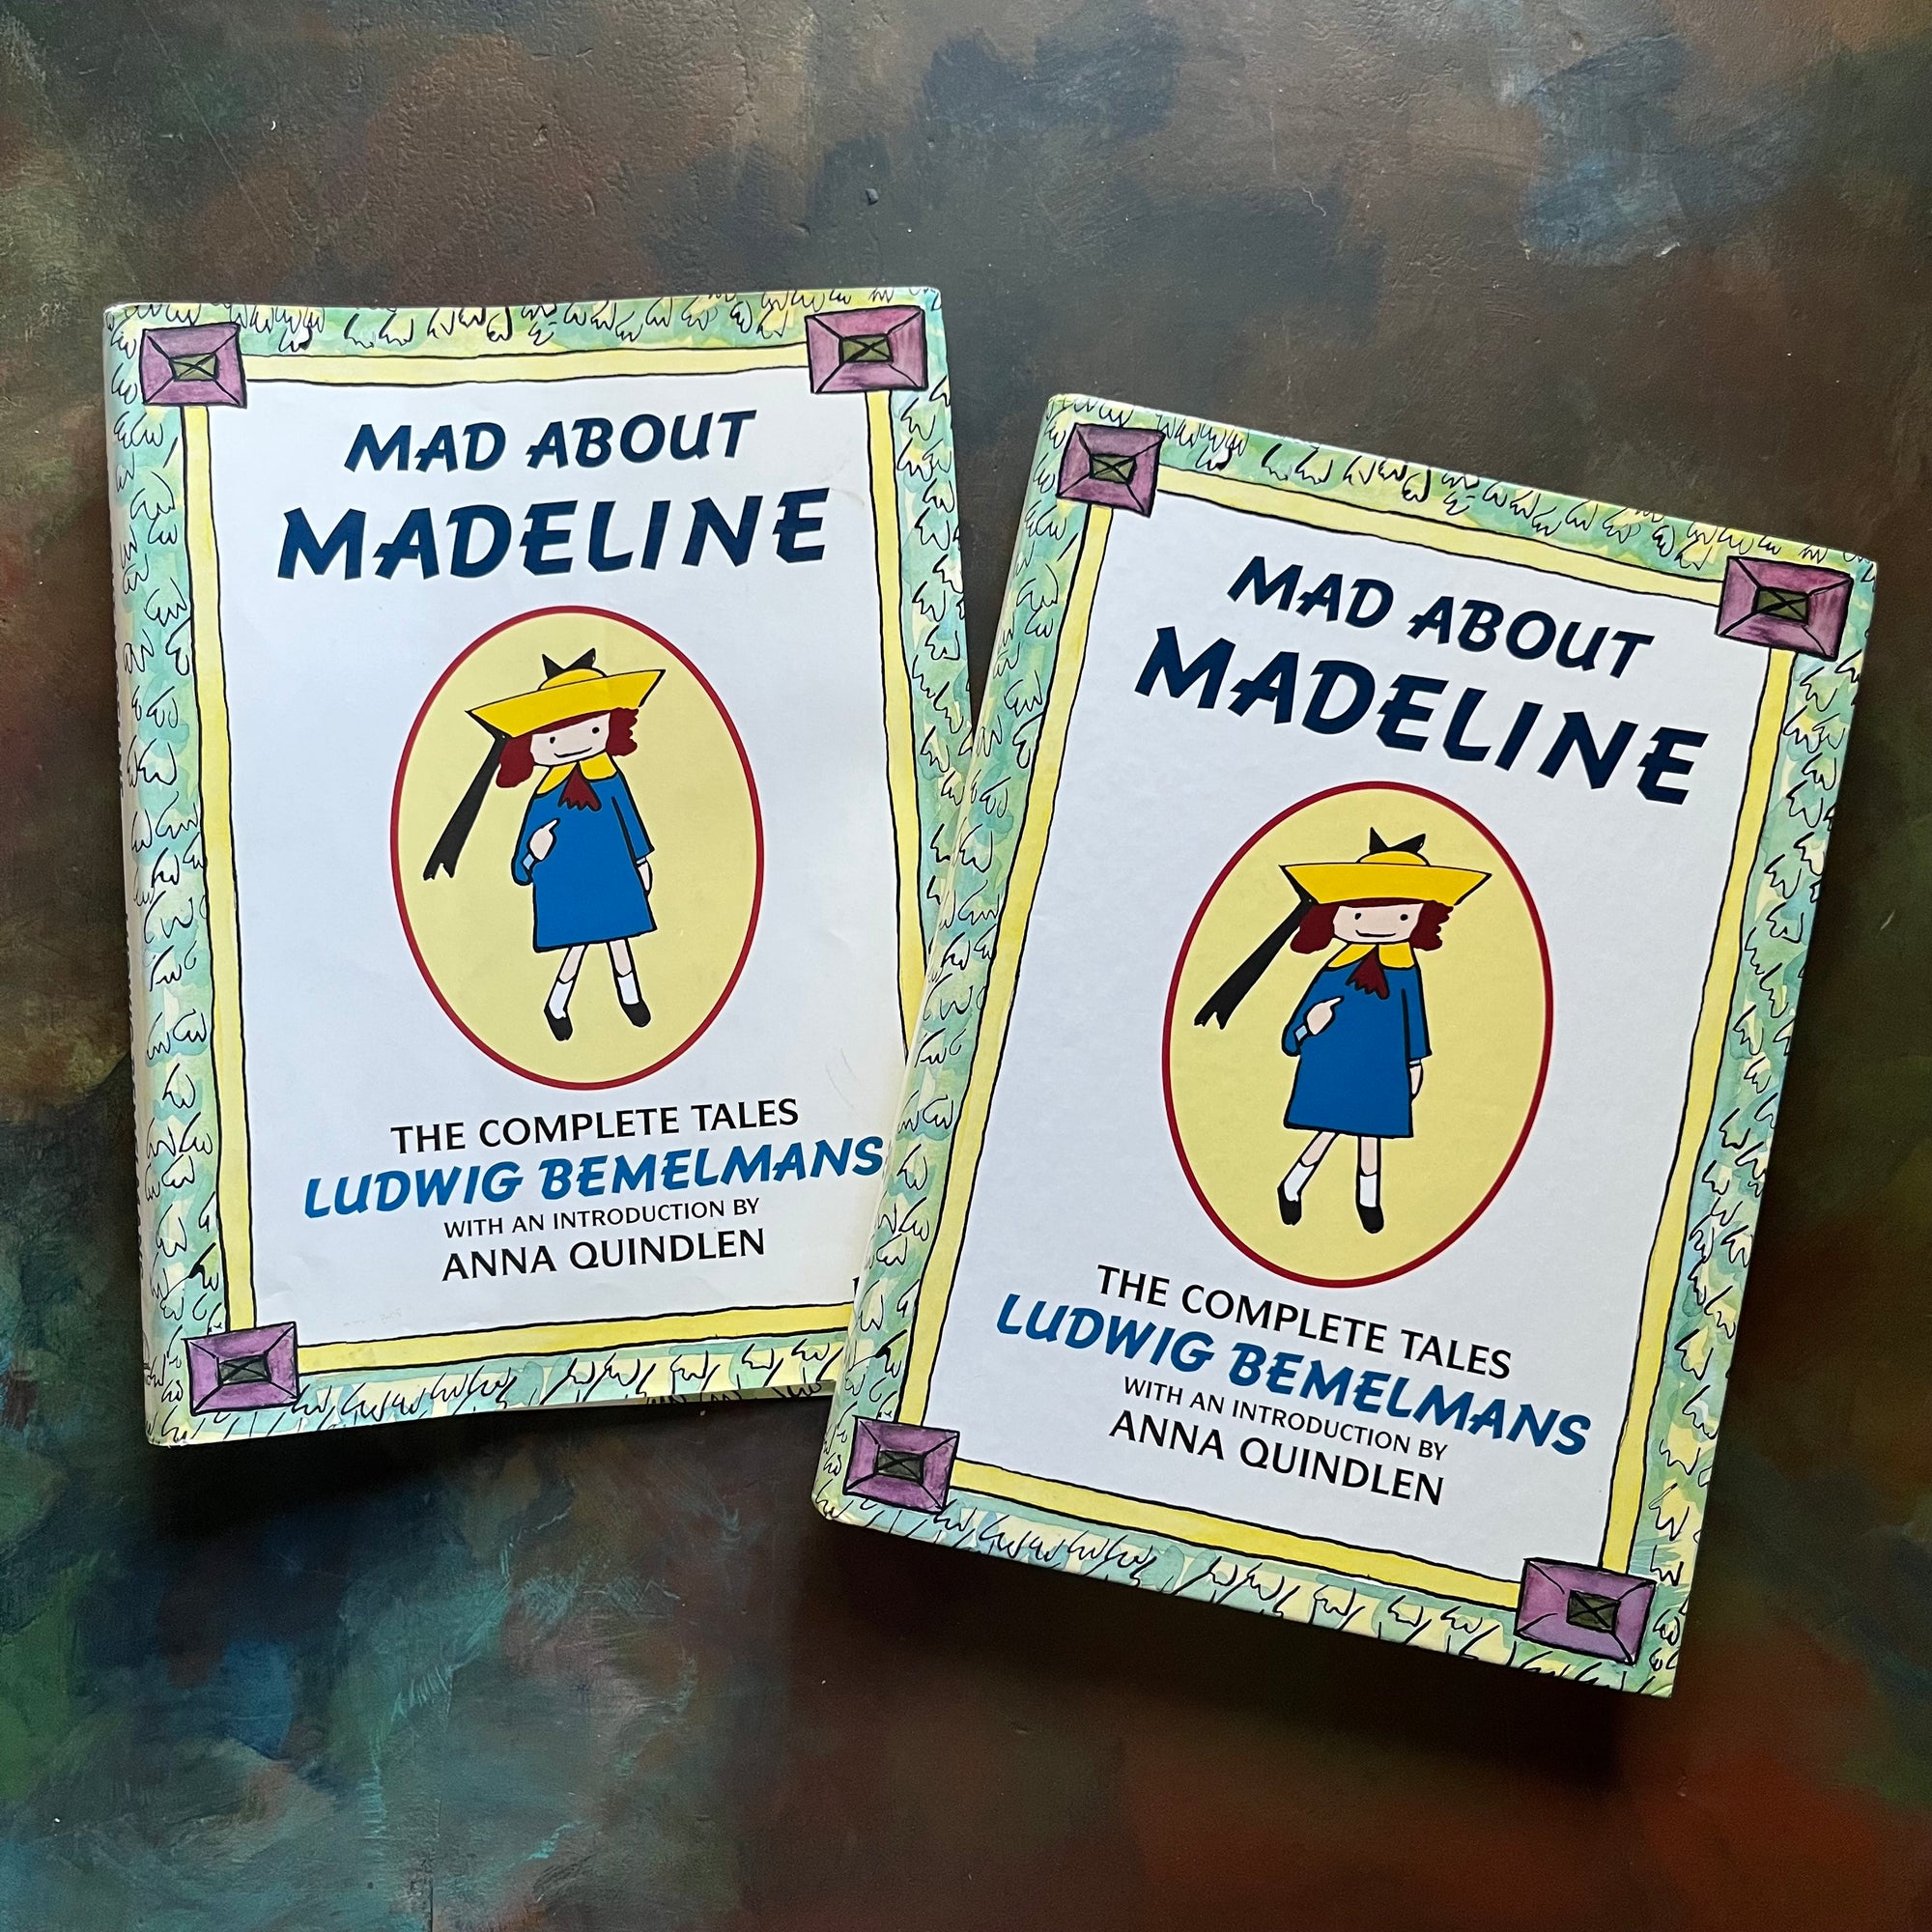 Mad About Madeline by Ludwig Bemelmans-The Complete Tales-vintage children's stories-view of the front covers of dust jacket & actual book